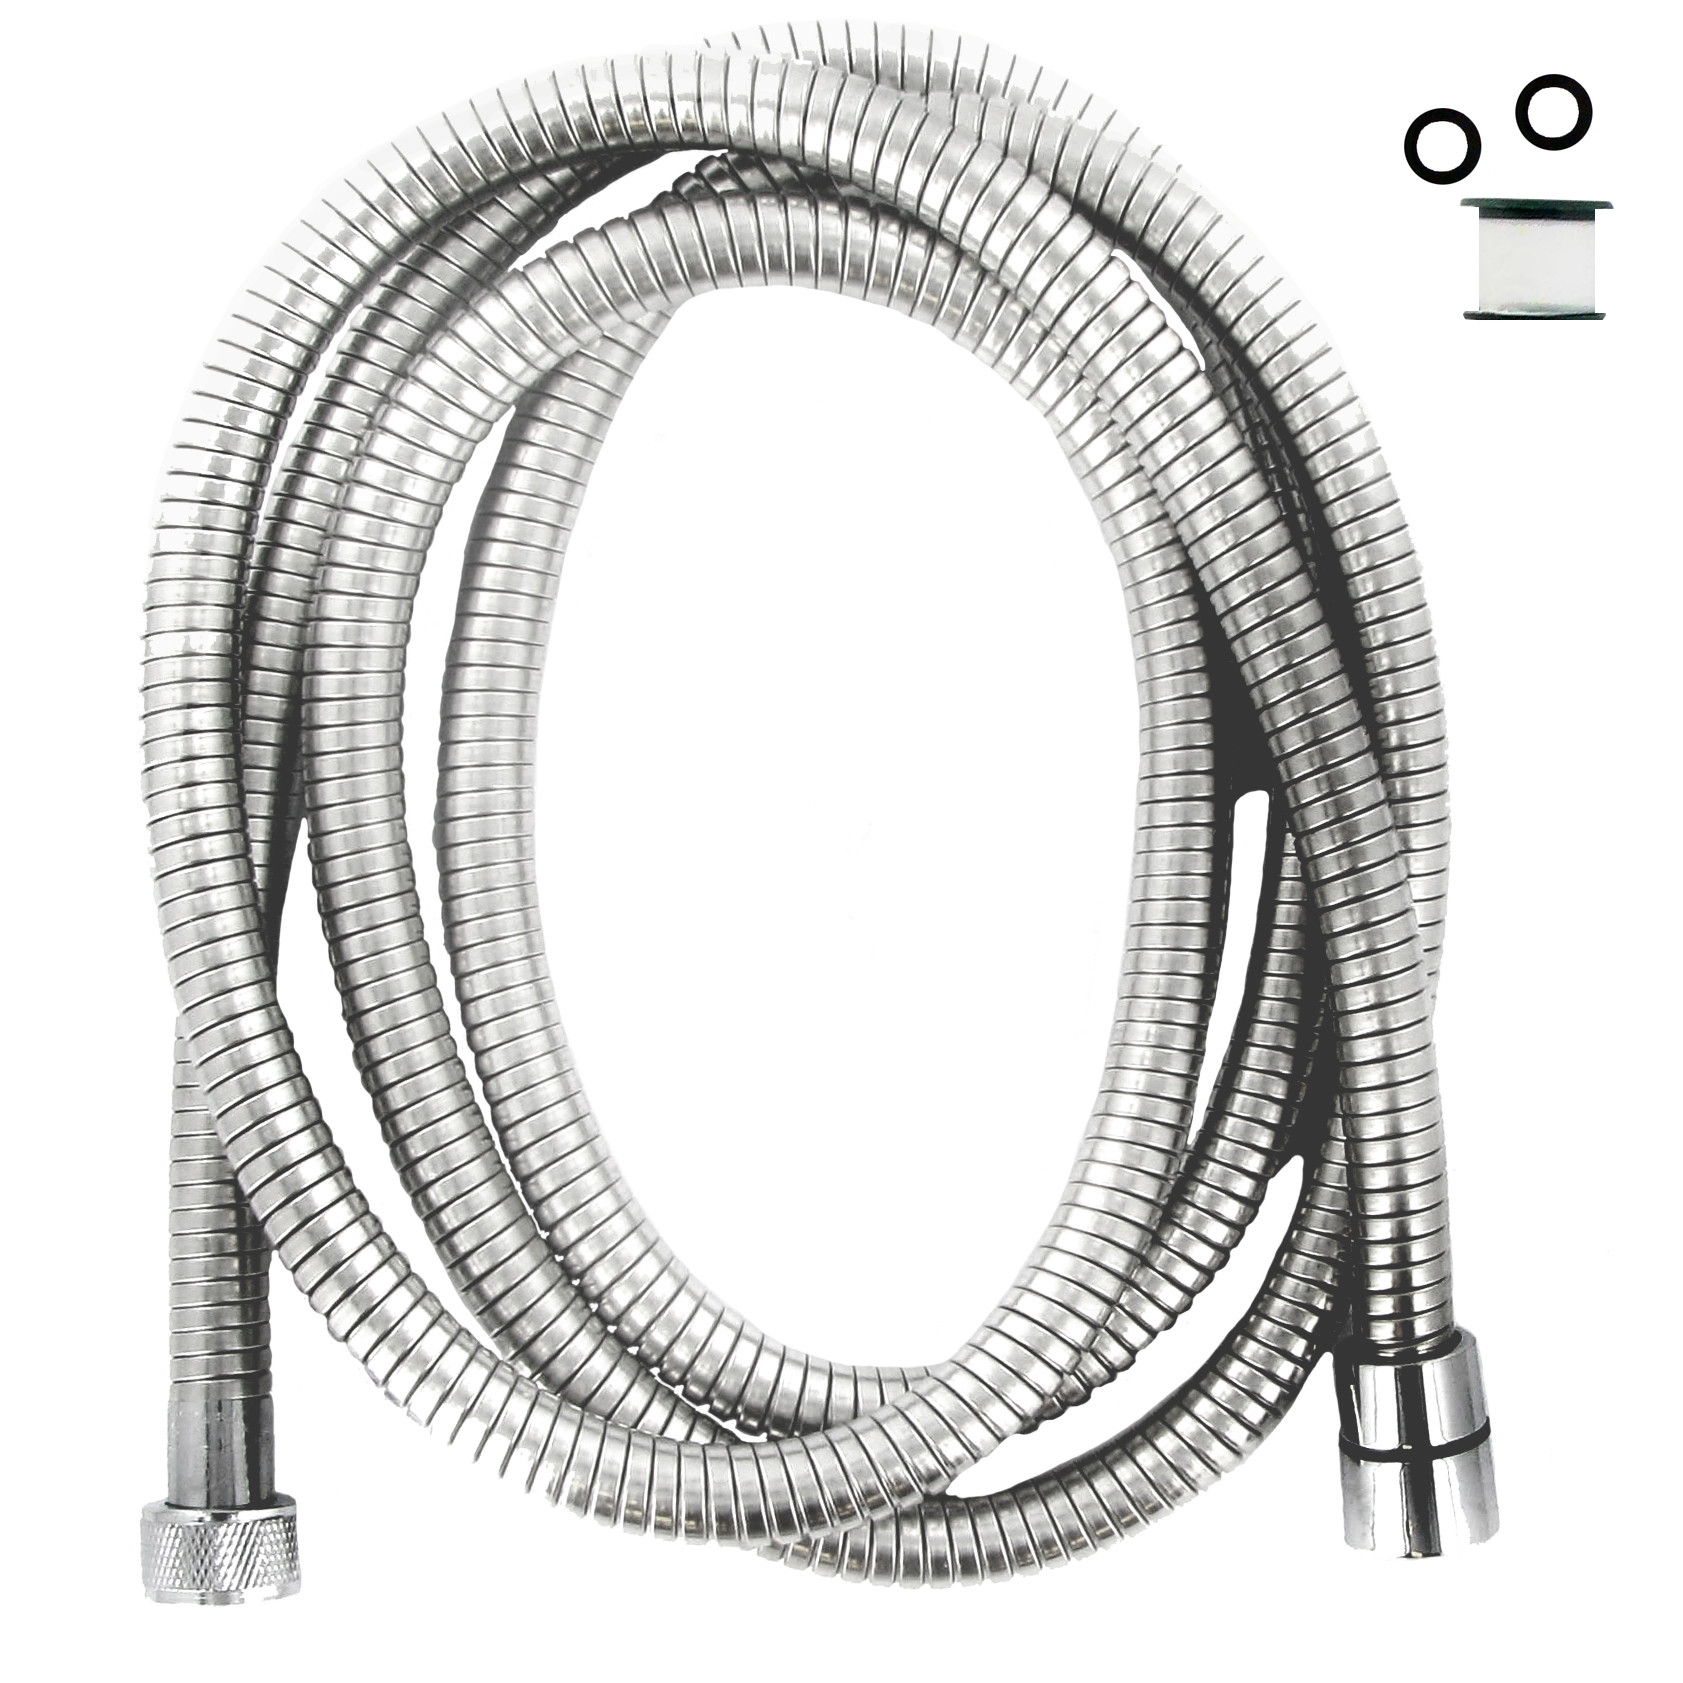 Whedon AF206C Shower Hose, 1/2 in Female, Stainless Steel, Chrome